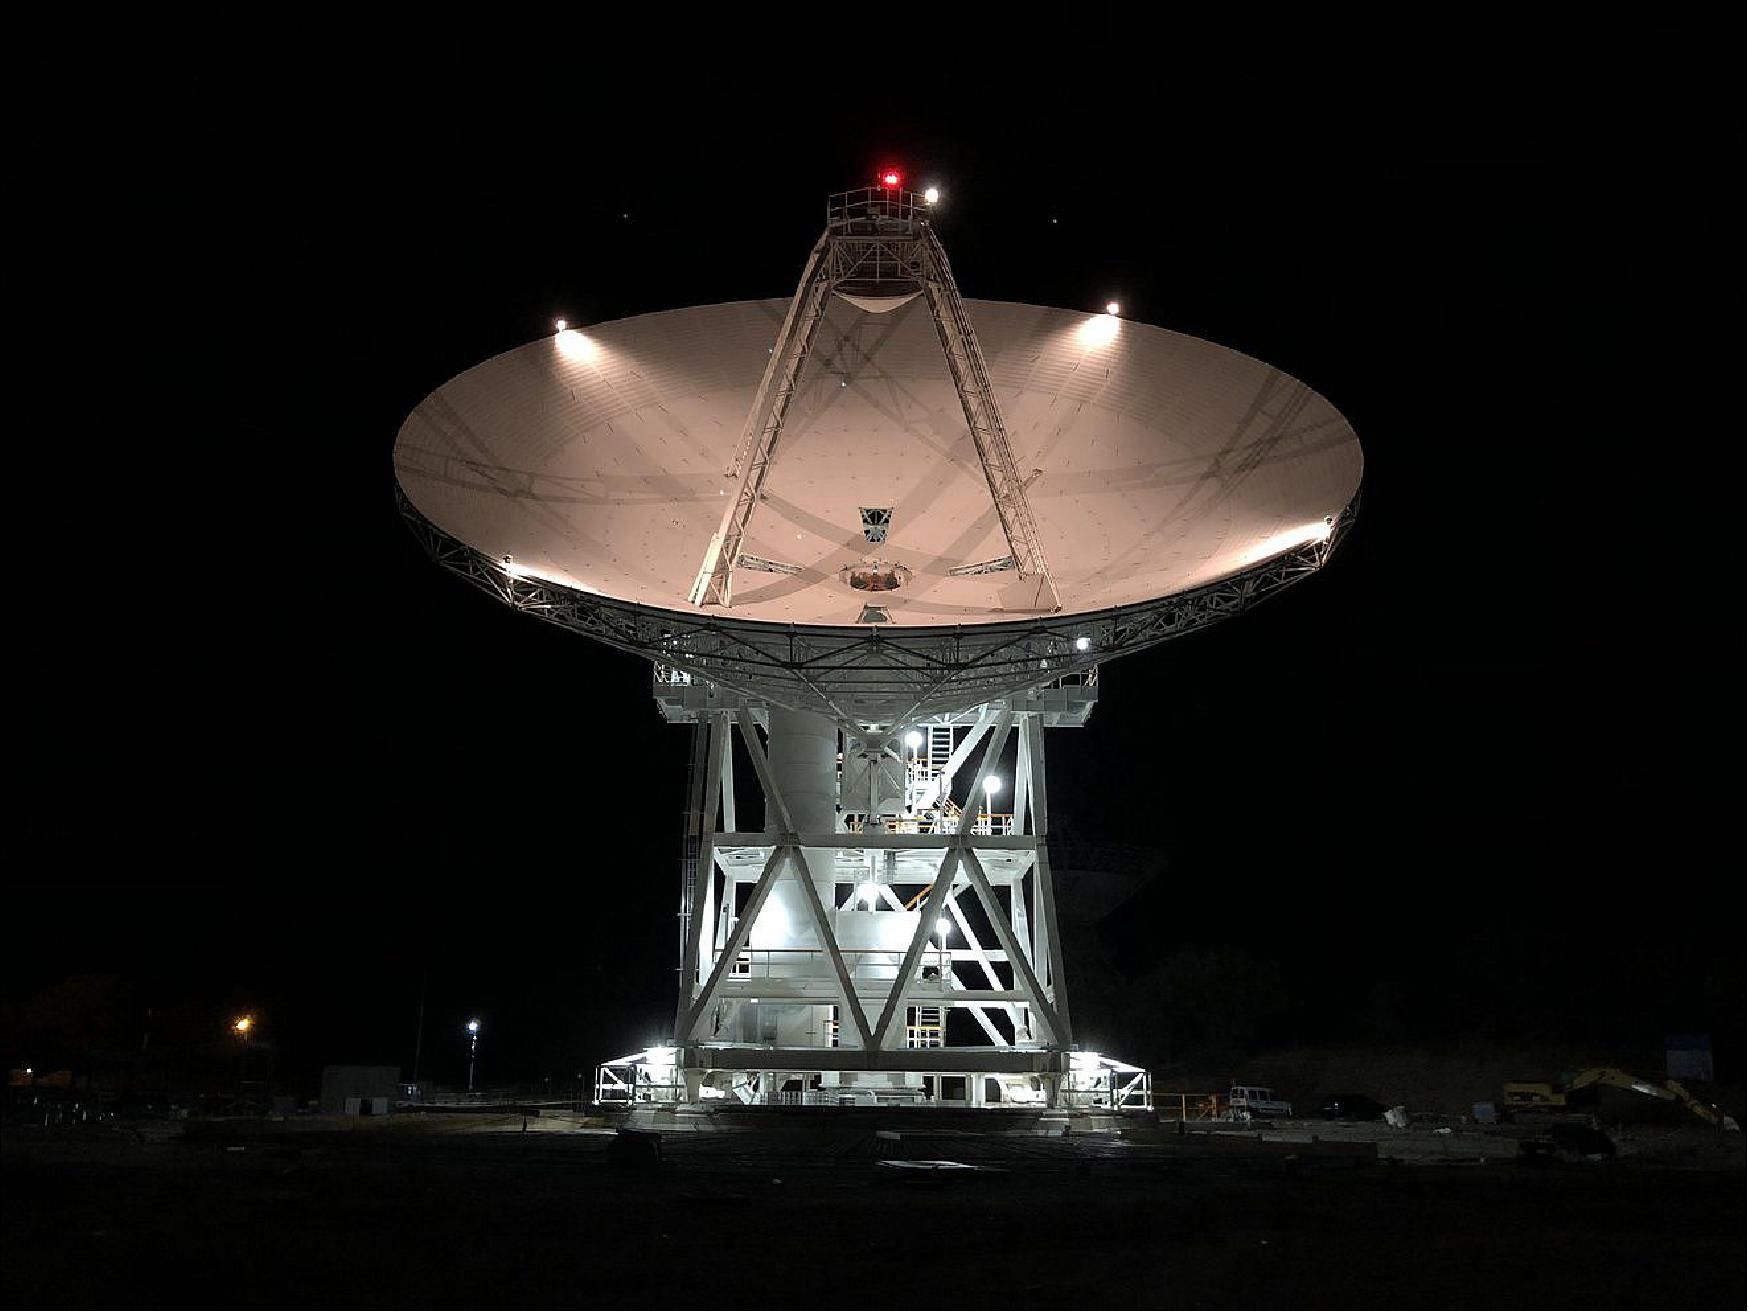 Figure 16: DSS-56 (Deep Space Station 56) is a powerful 34-meter-wide antenna that was added to the Deep Space Network's Madrid Deep Space Communications Complex in Spain in early 2021 (image credit: NASA/JPL-Caltech)